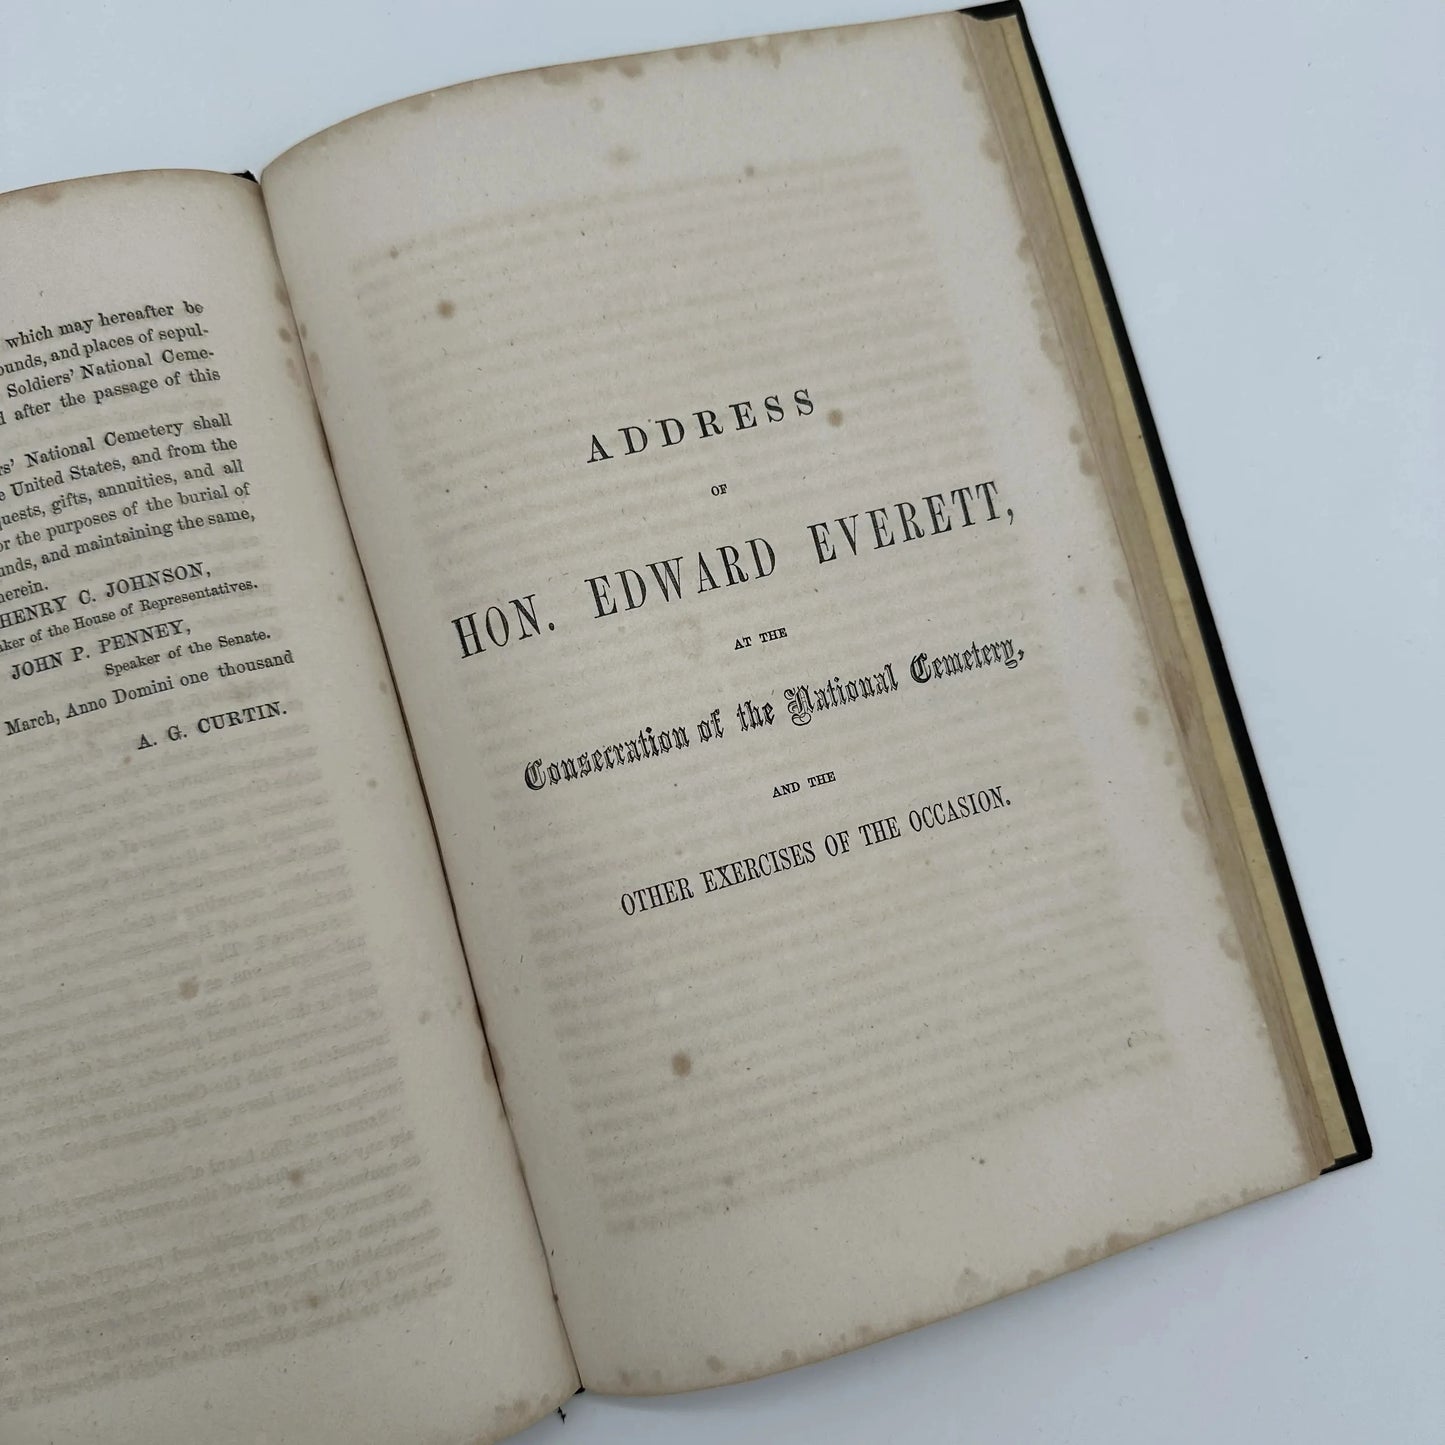 1864 report on Gettysburg National Cemetery including an early printing of the Gettysburg Address